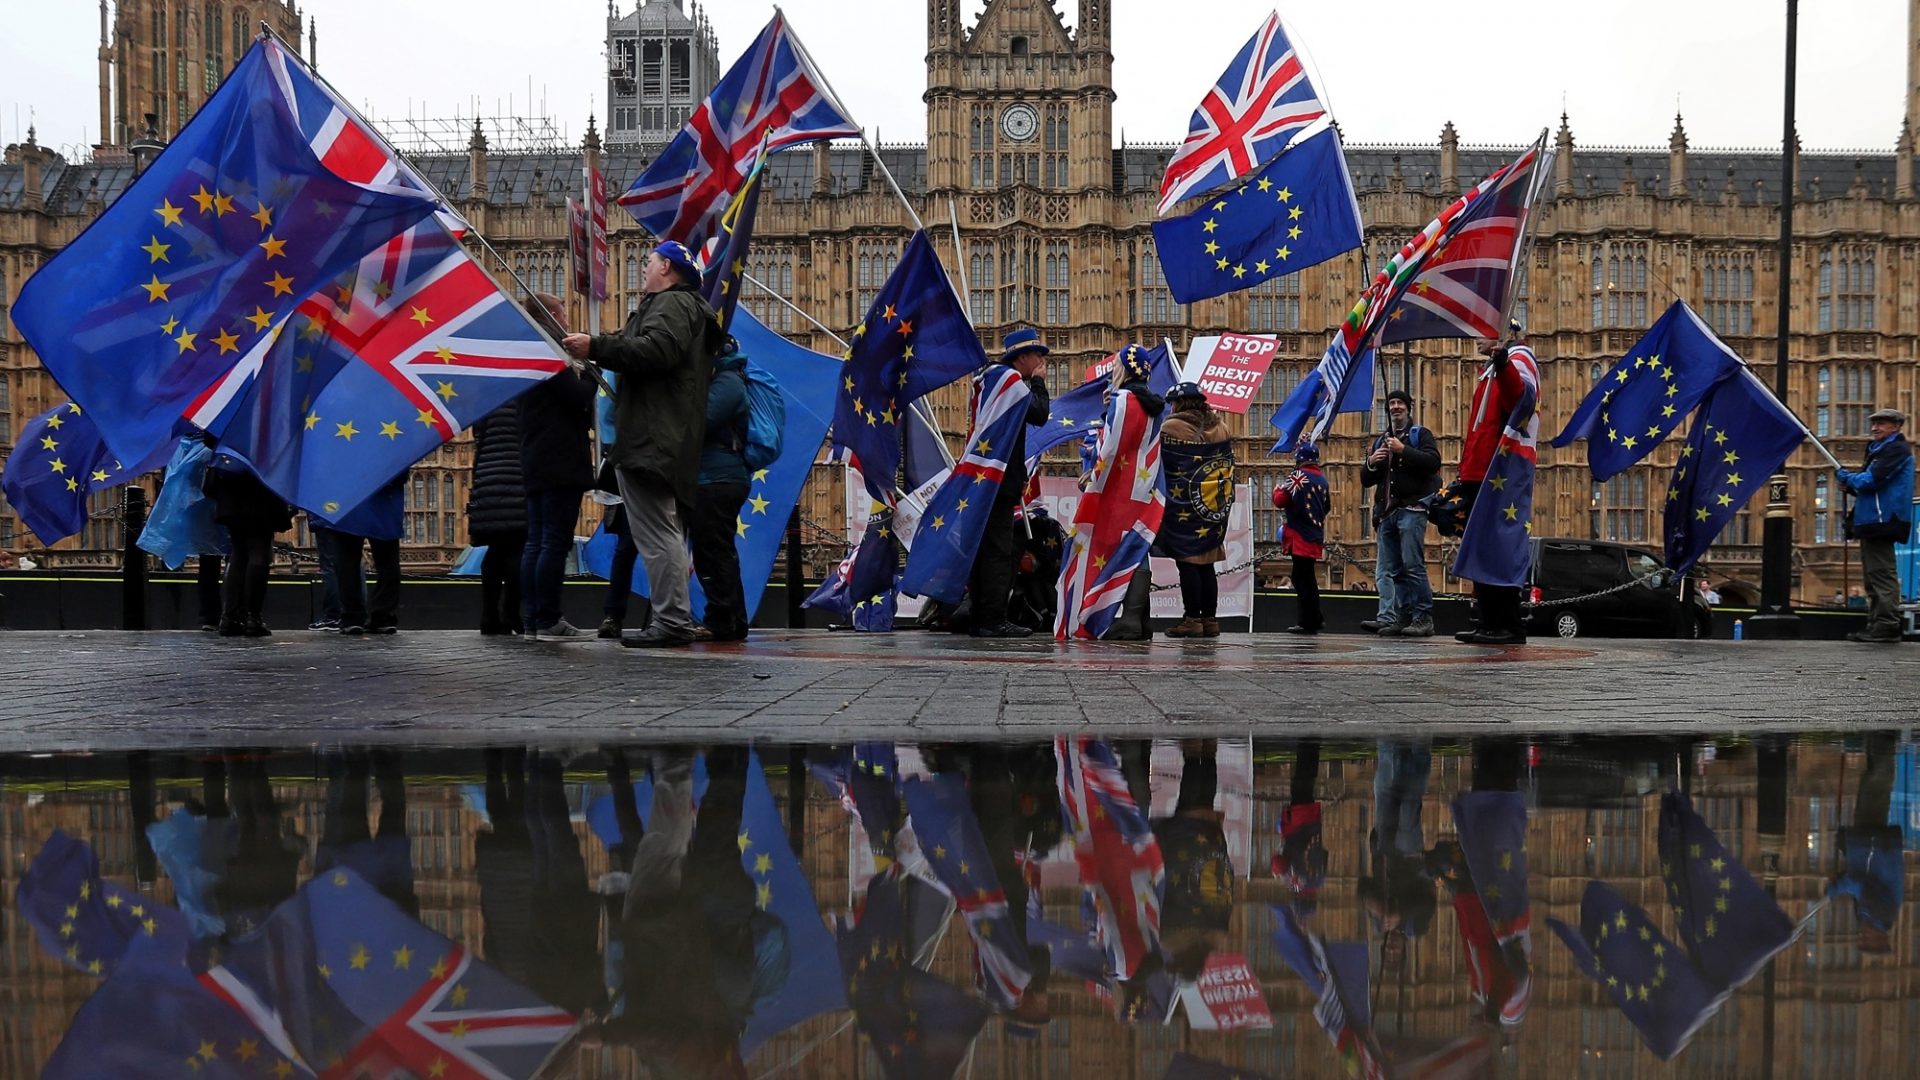 Pro-EU protesters make their feelings known outside the Houses of Parliament. Photo: Daniel Leal/AFP/Getty